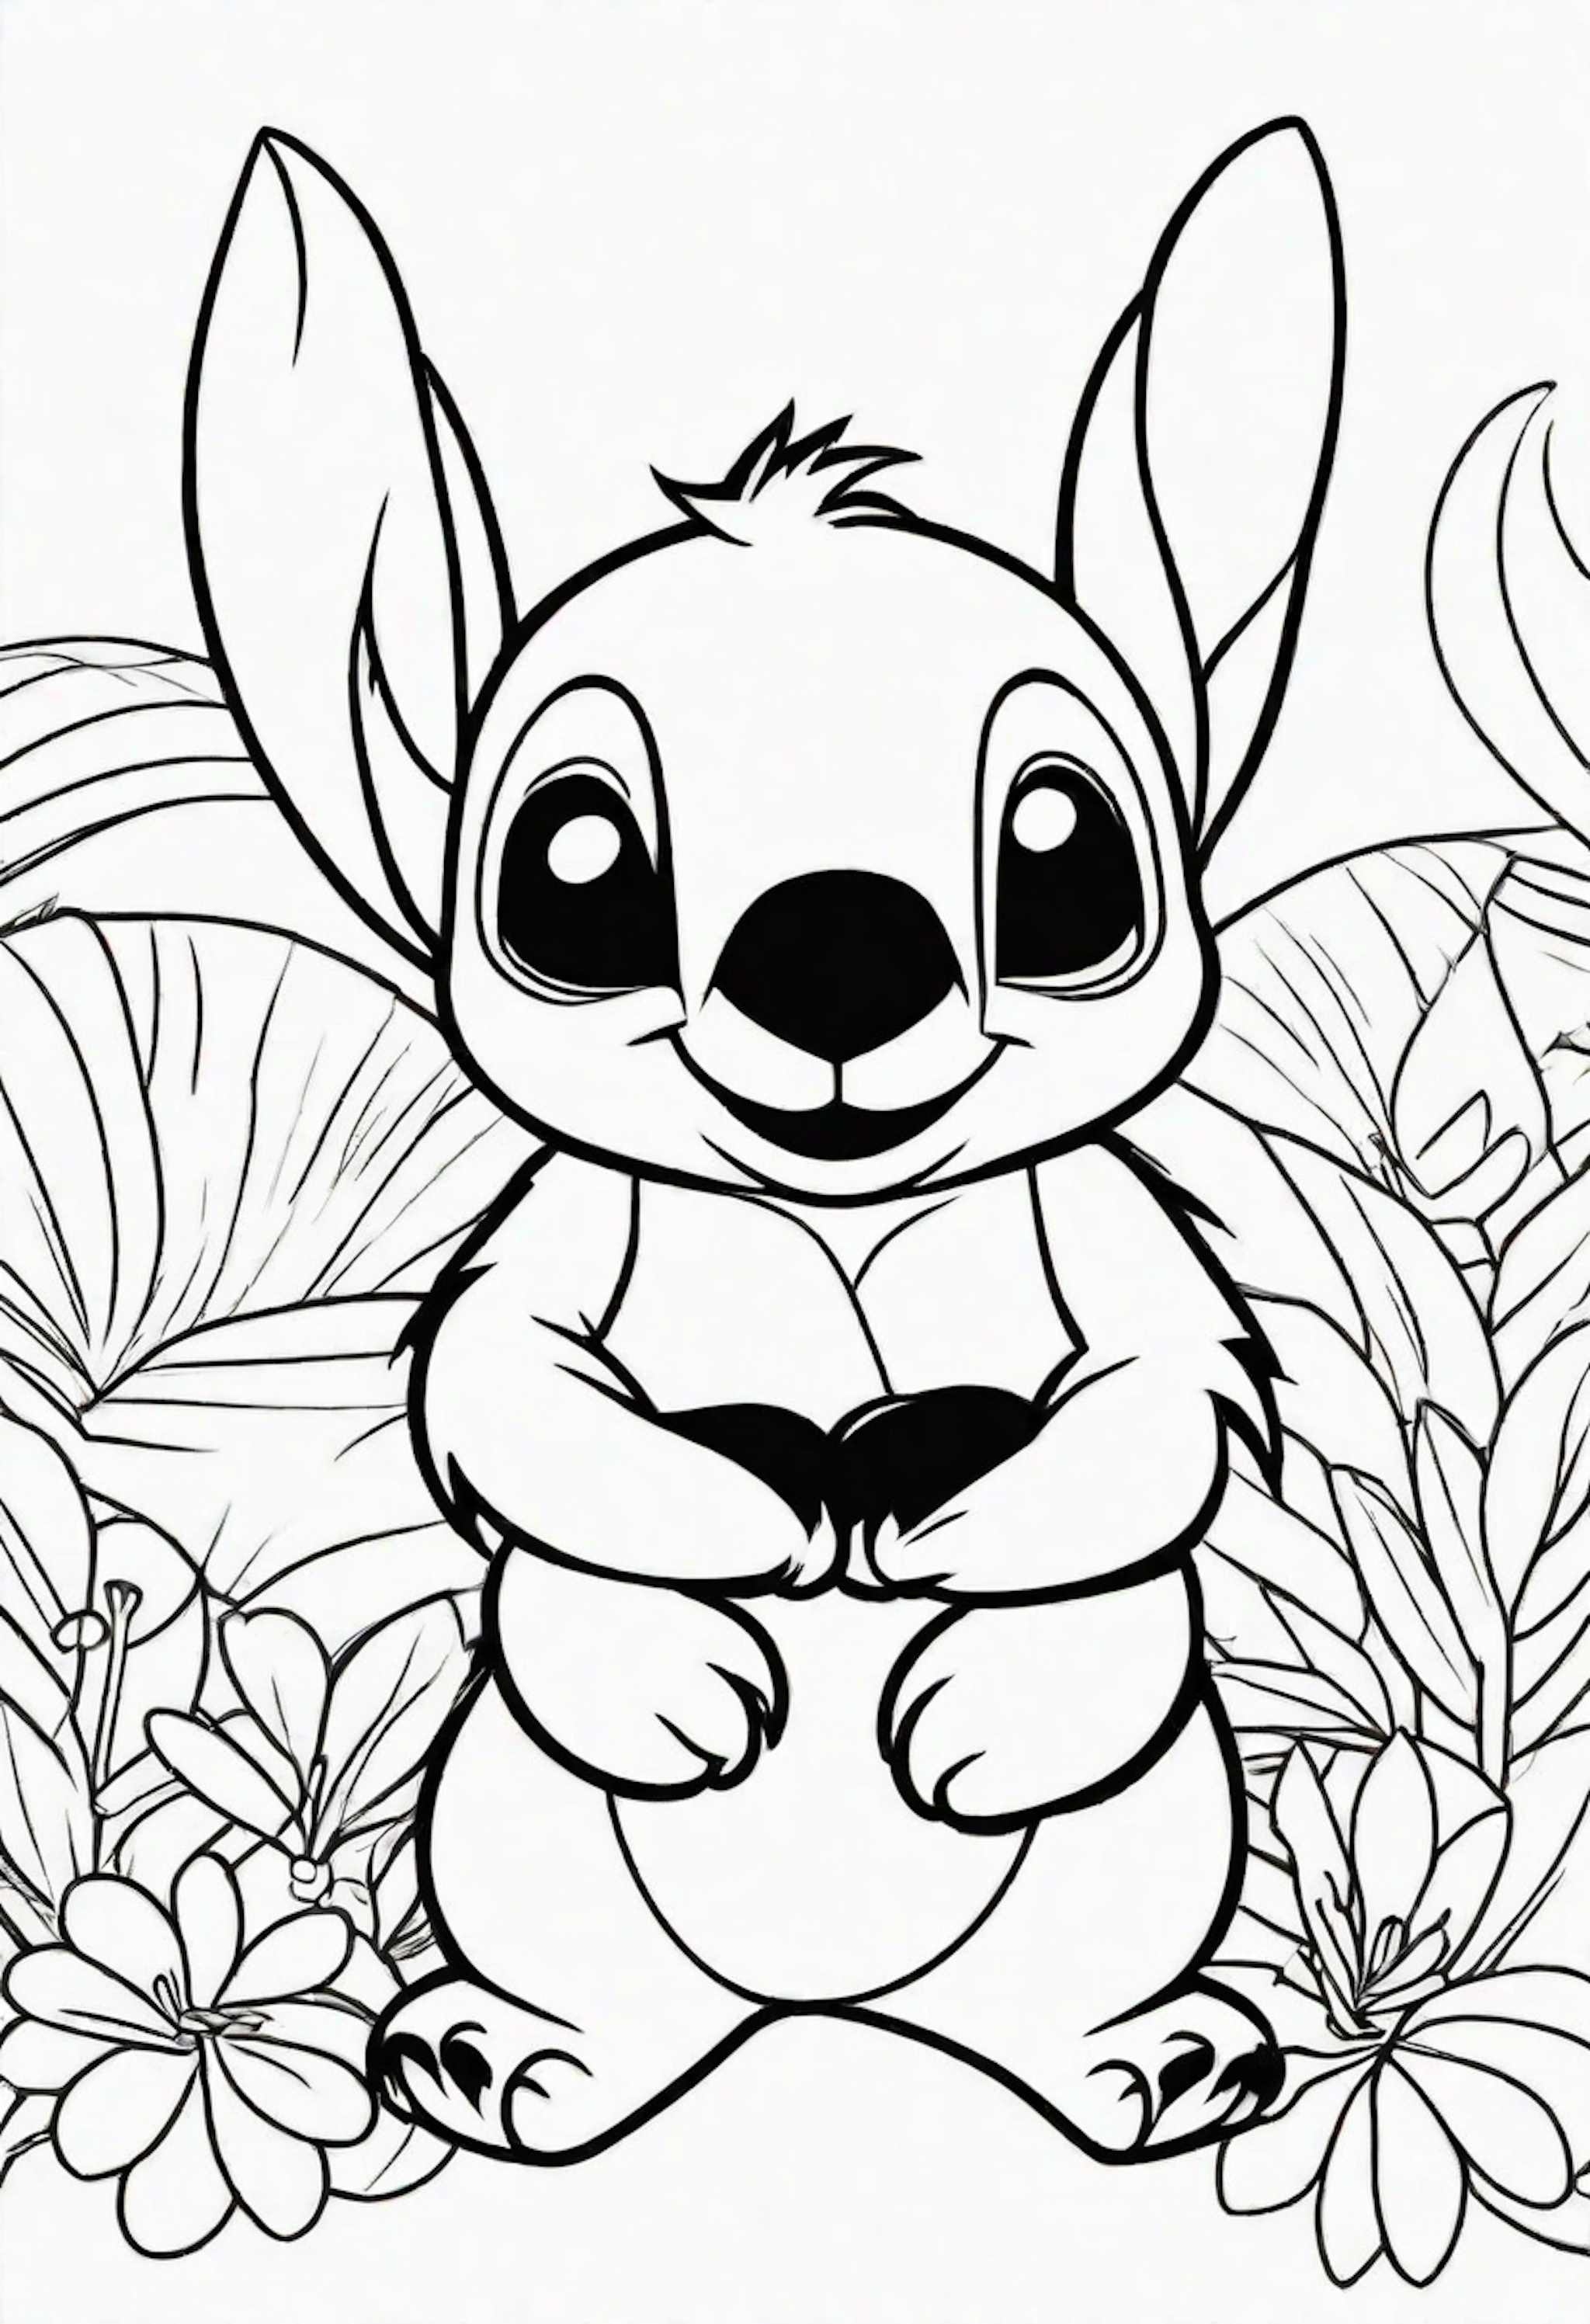 A coloring page for 1 Stitch coloring pages